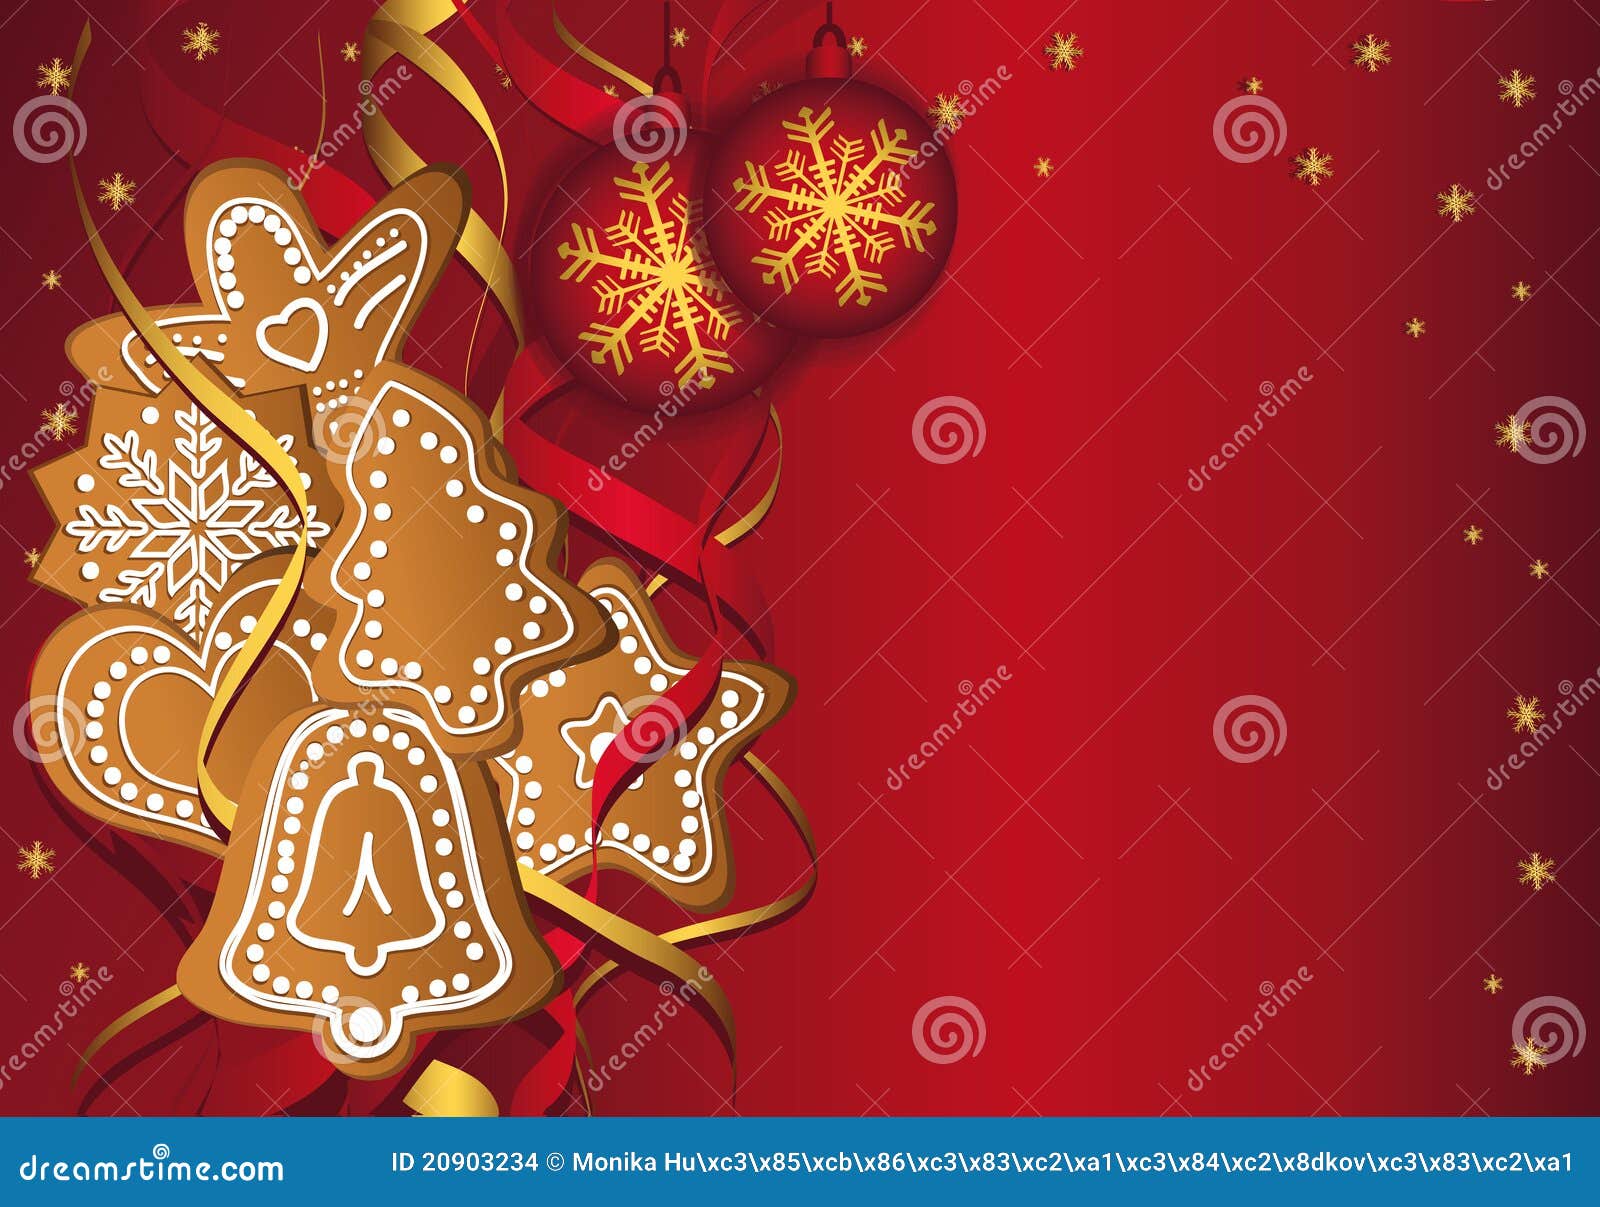 Christmas Gingerbread Templates Red Stock Vector Illustration Of Poster Flake 20903234